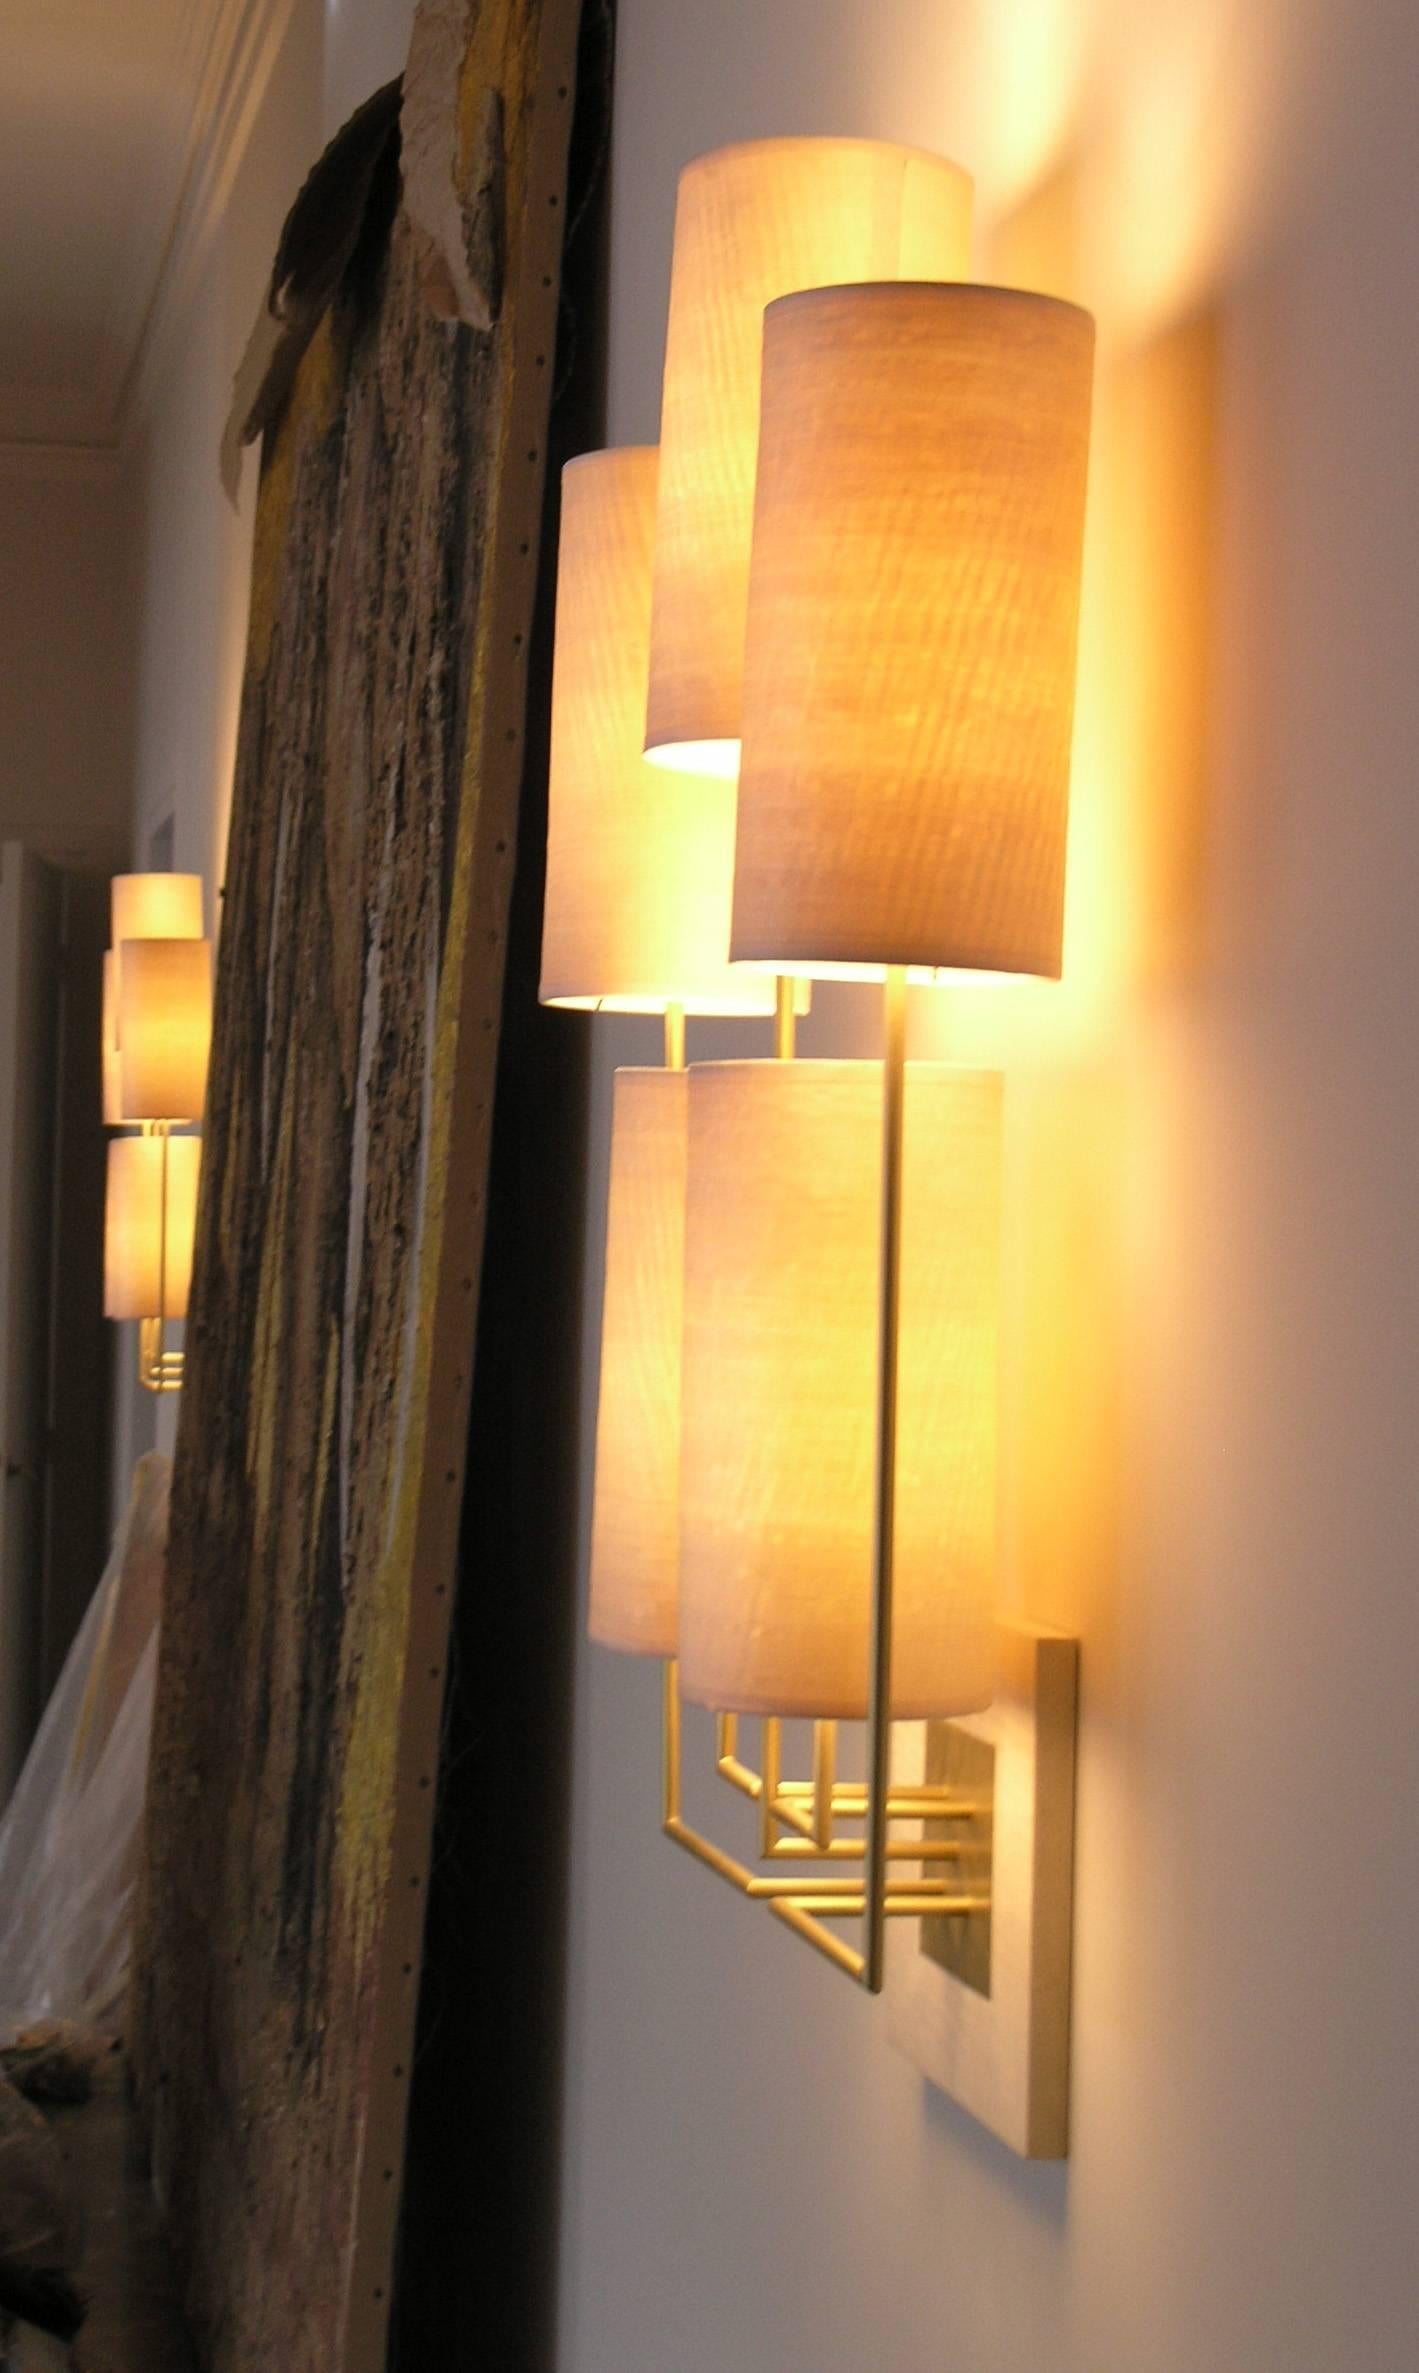 Wall Lamp Sconce “Tige5” Gold Bronze Patina and Five Wooden lampshades by Aymeric Lefort made to order. 
This wall lamp is made in a metal gold patina tube fixed on a wooden Sycomore scare. The lampshade is made in 